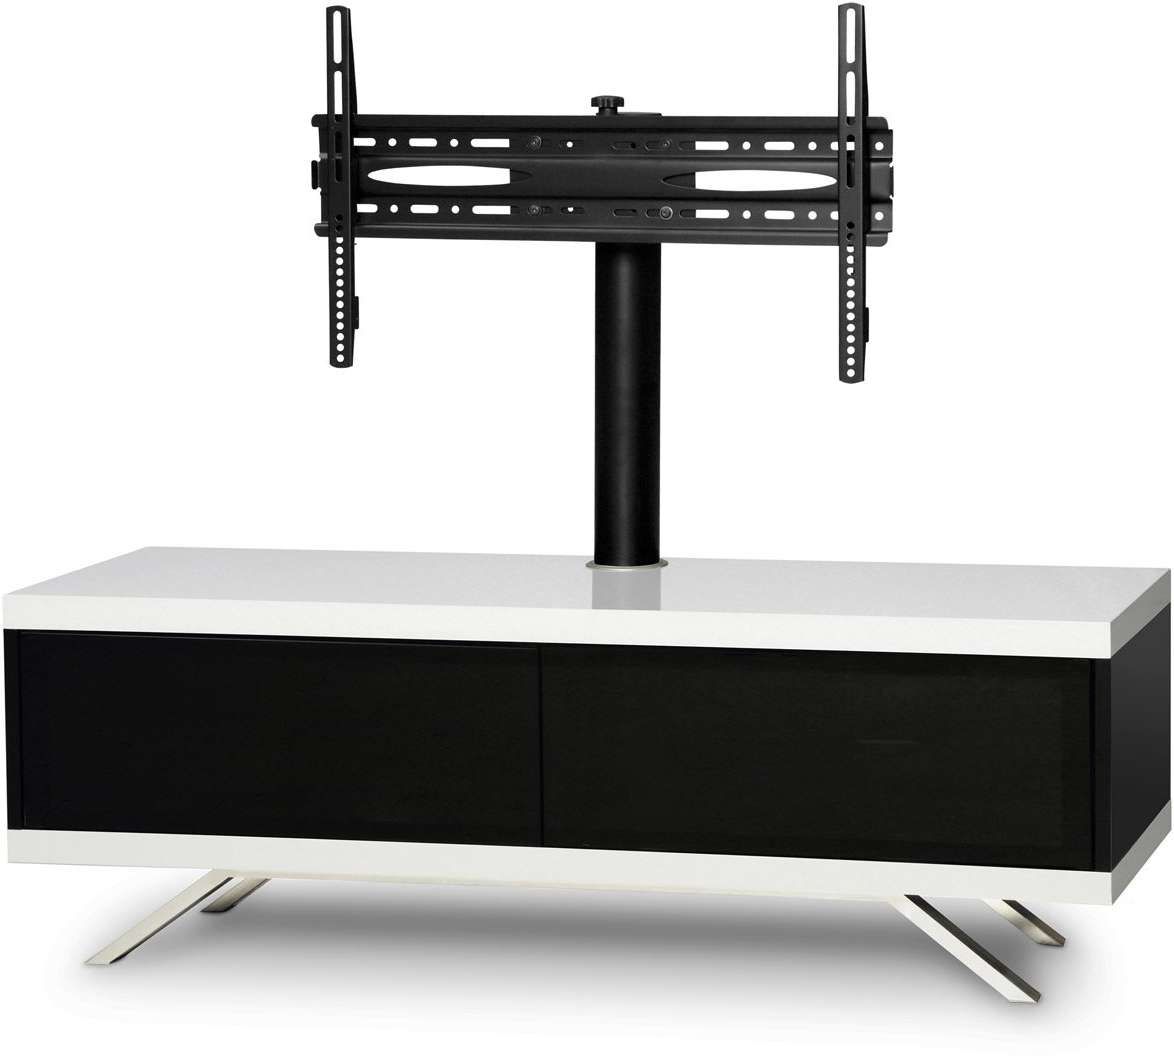 Mda Designs Tucana Wht Bkt Tv Stands Intended For White Cantilever Tv Stands (View 4 of 20)